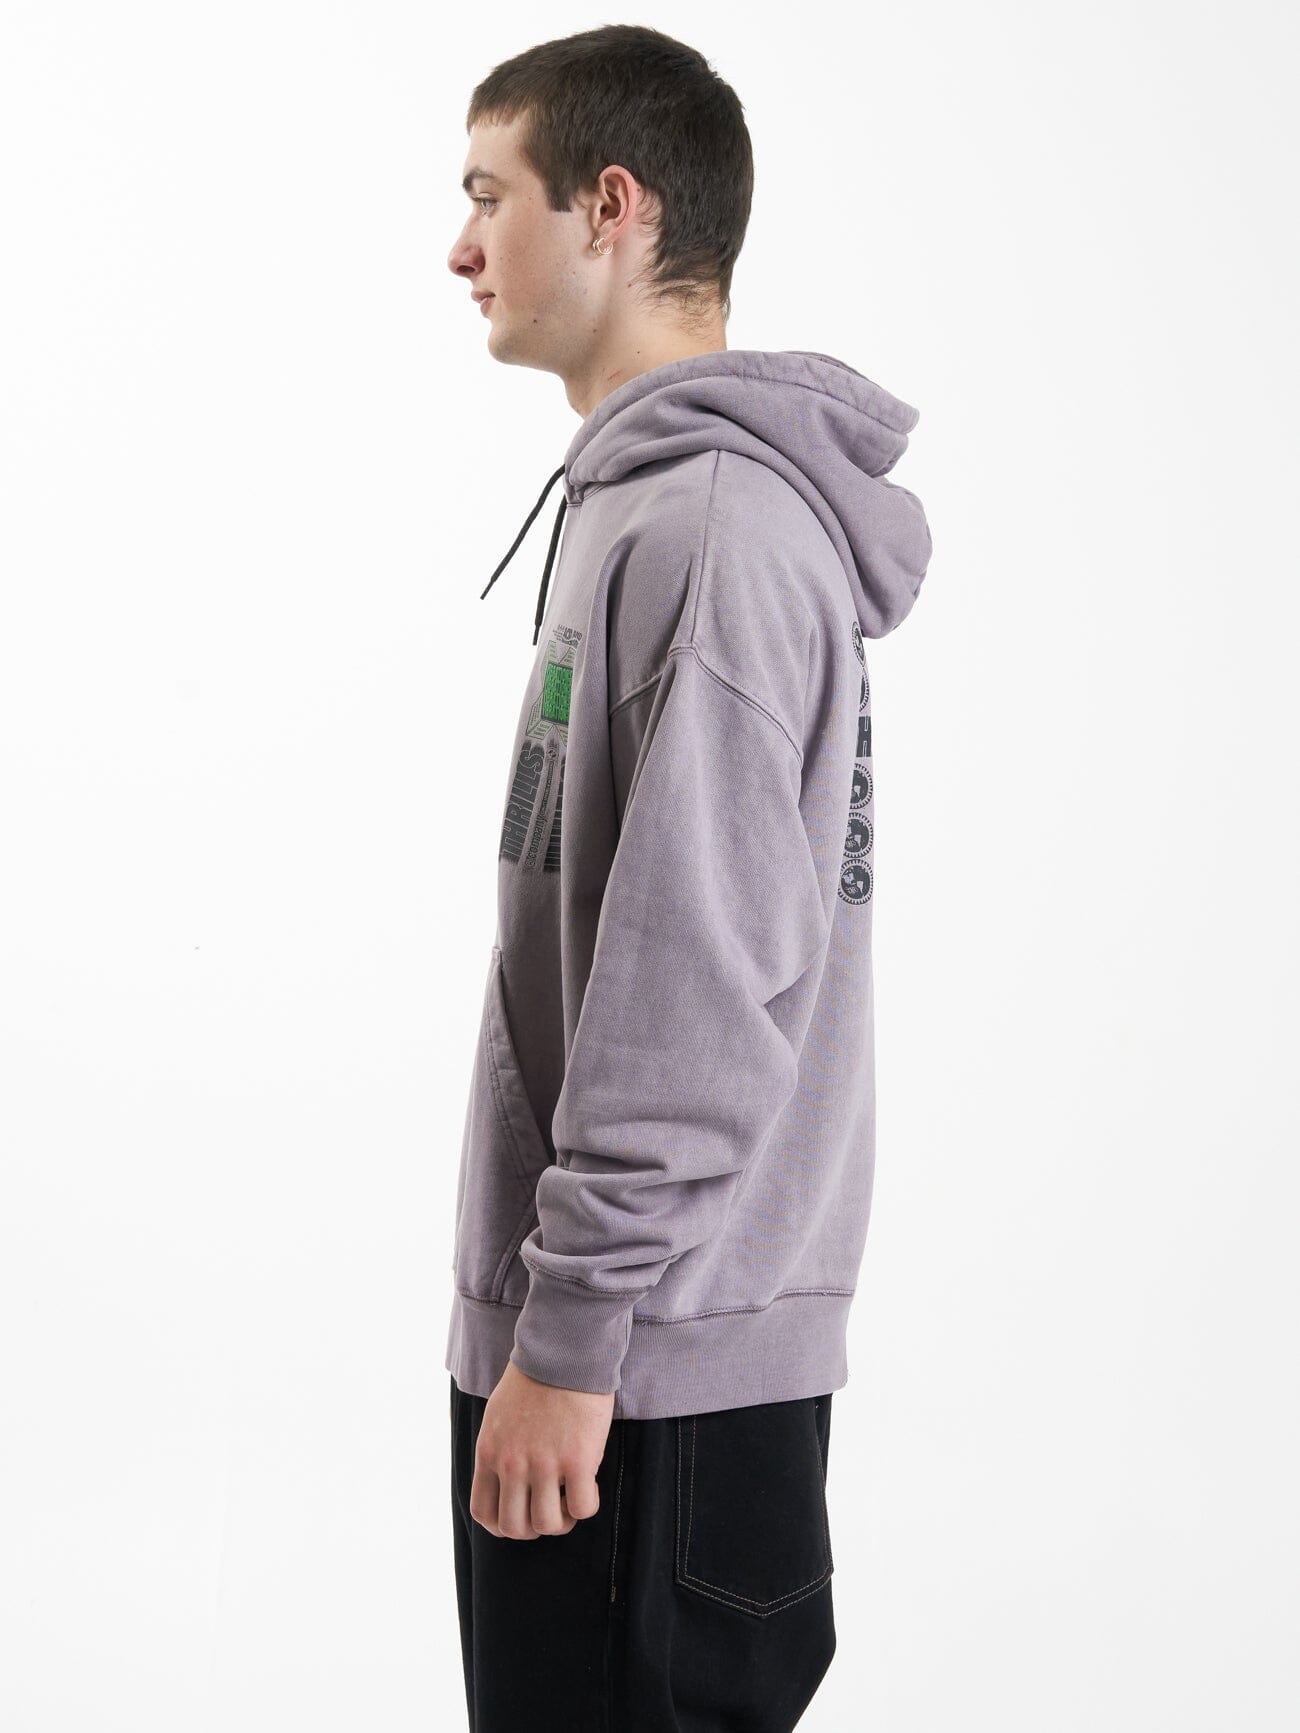 Vibrations Slouch Hood - Mineral Gray